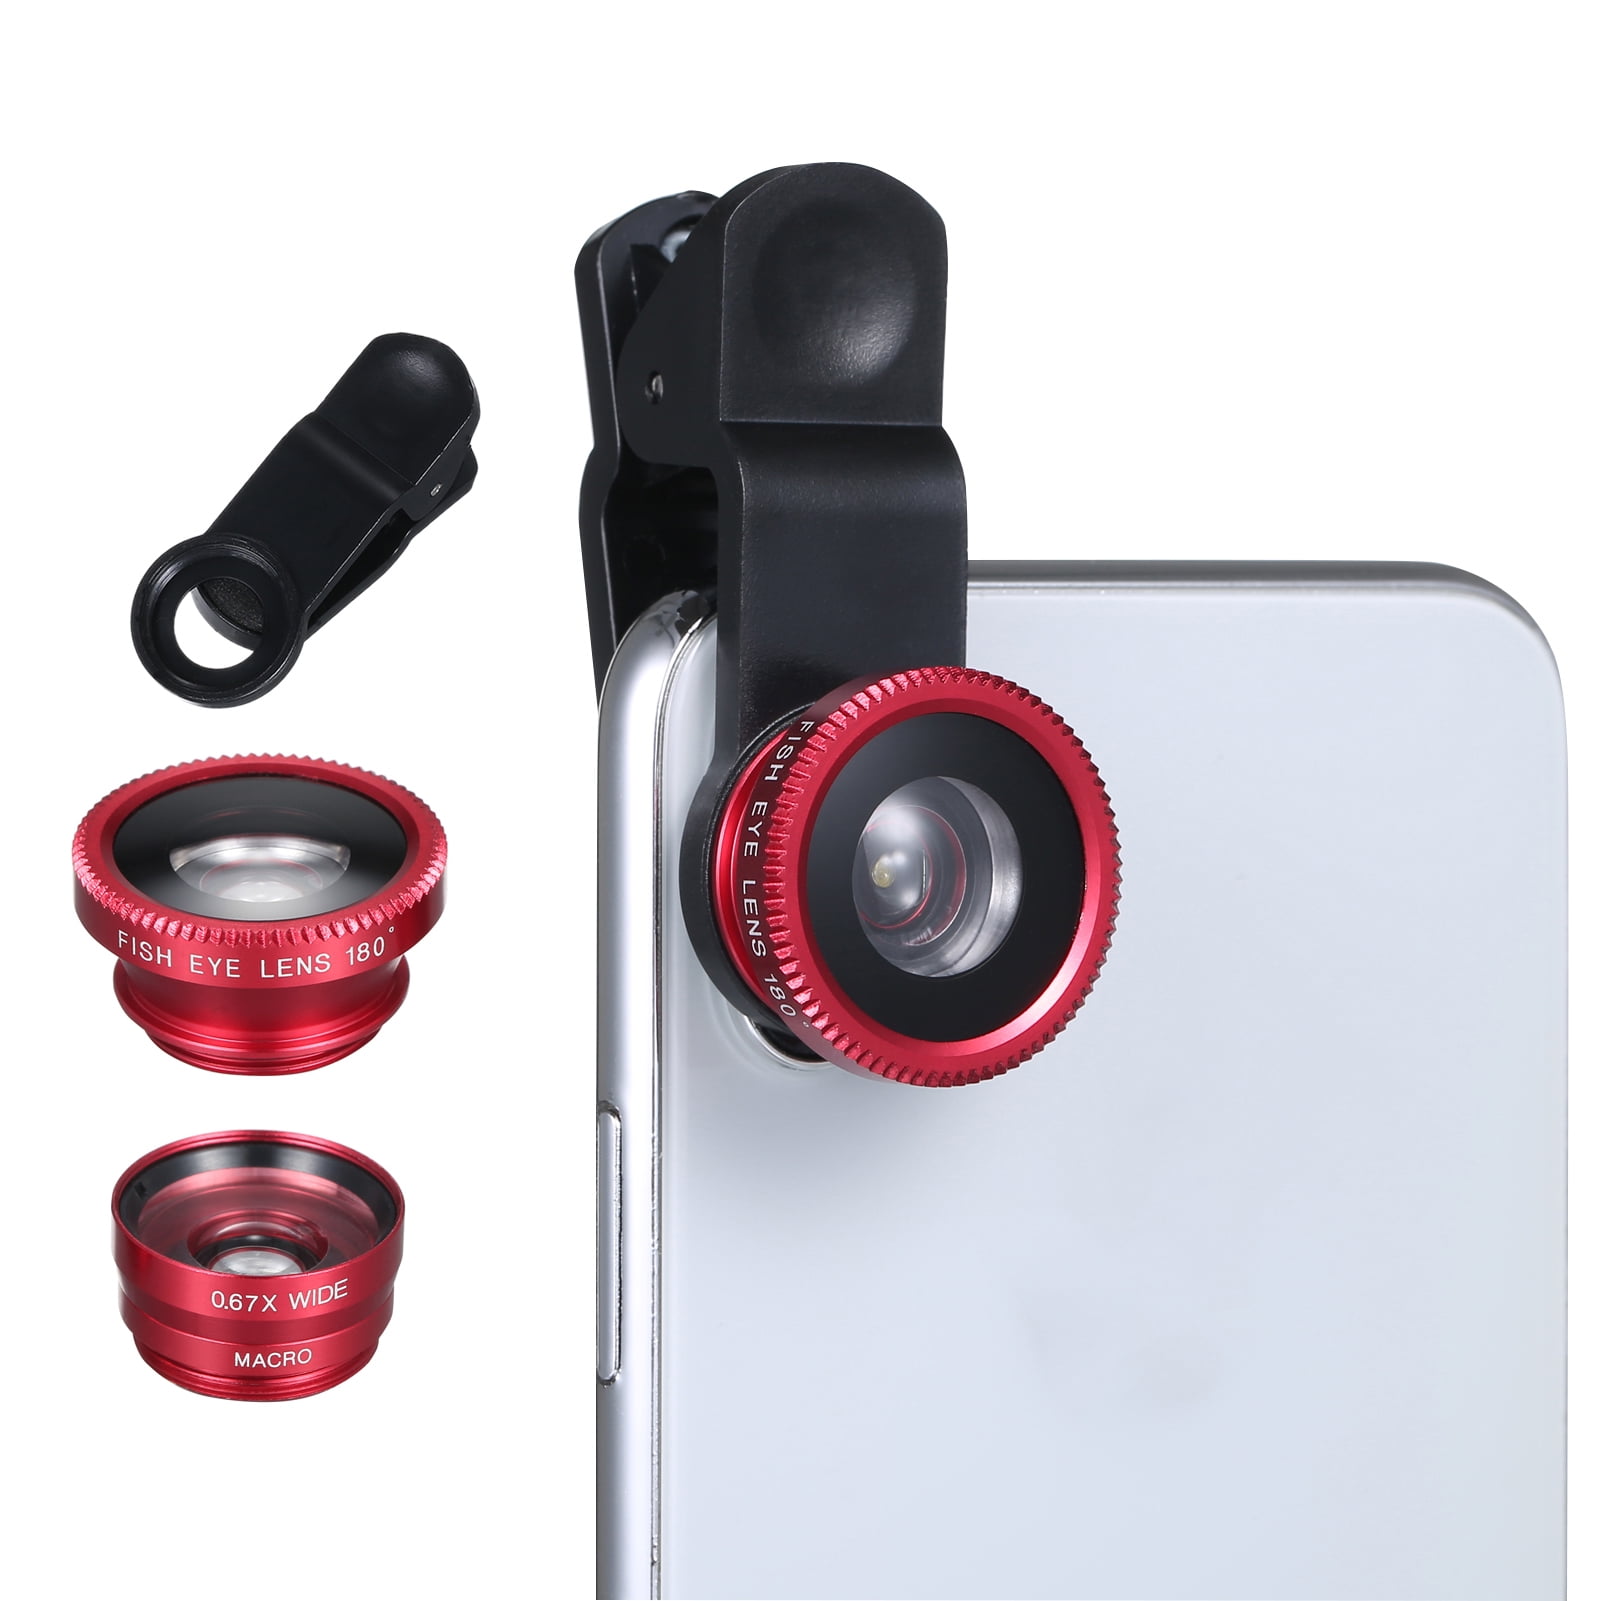 Feature Designed Travel case Android and Others, 8X HD Zoom Lens Kit with Wide Angle Macro Lens Telephoto Cell Phone Lens by WGear Universal Clip for Smartphone iOS 